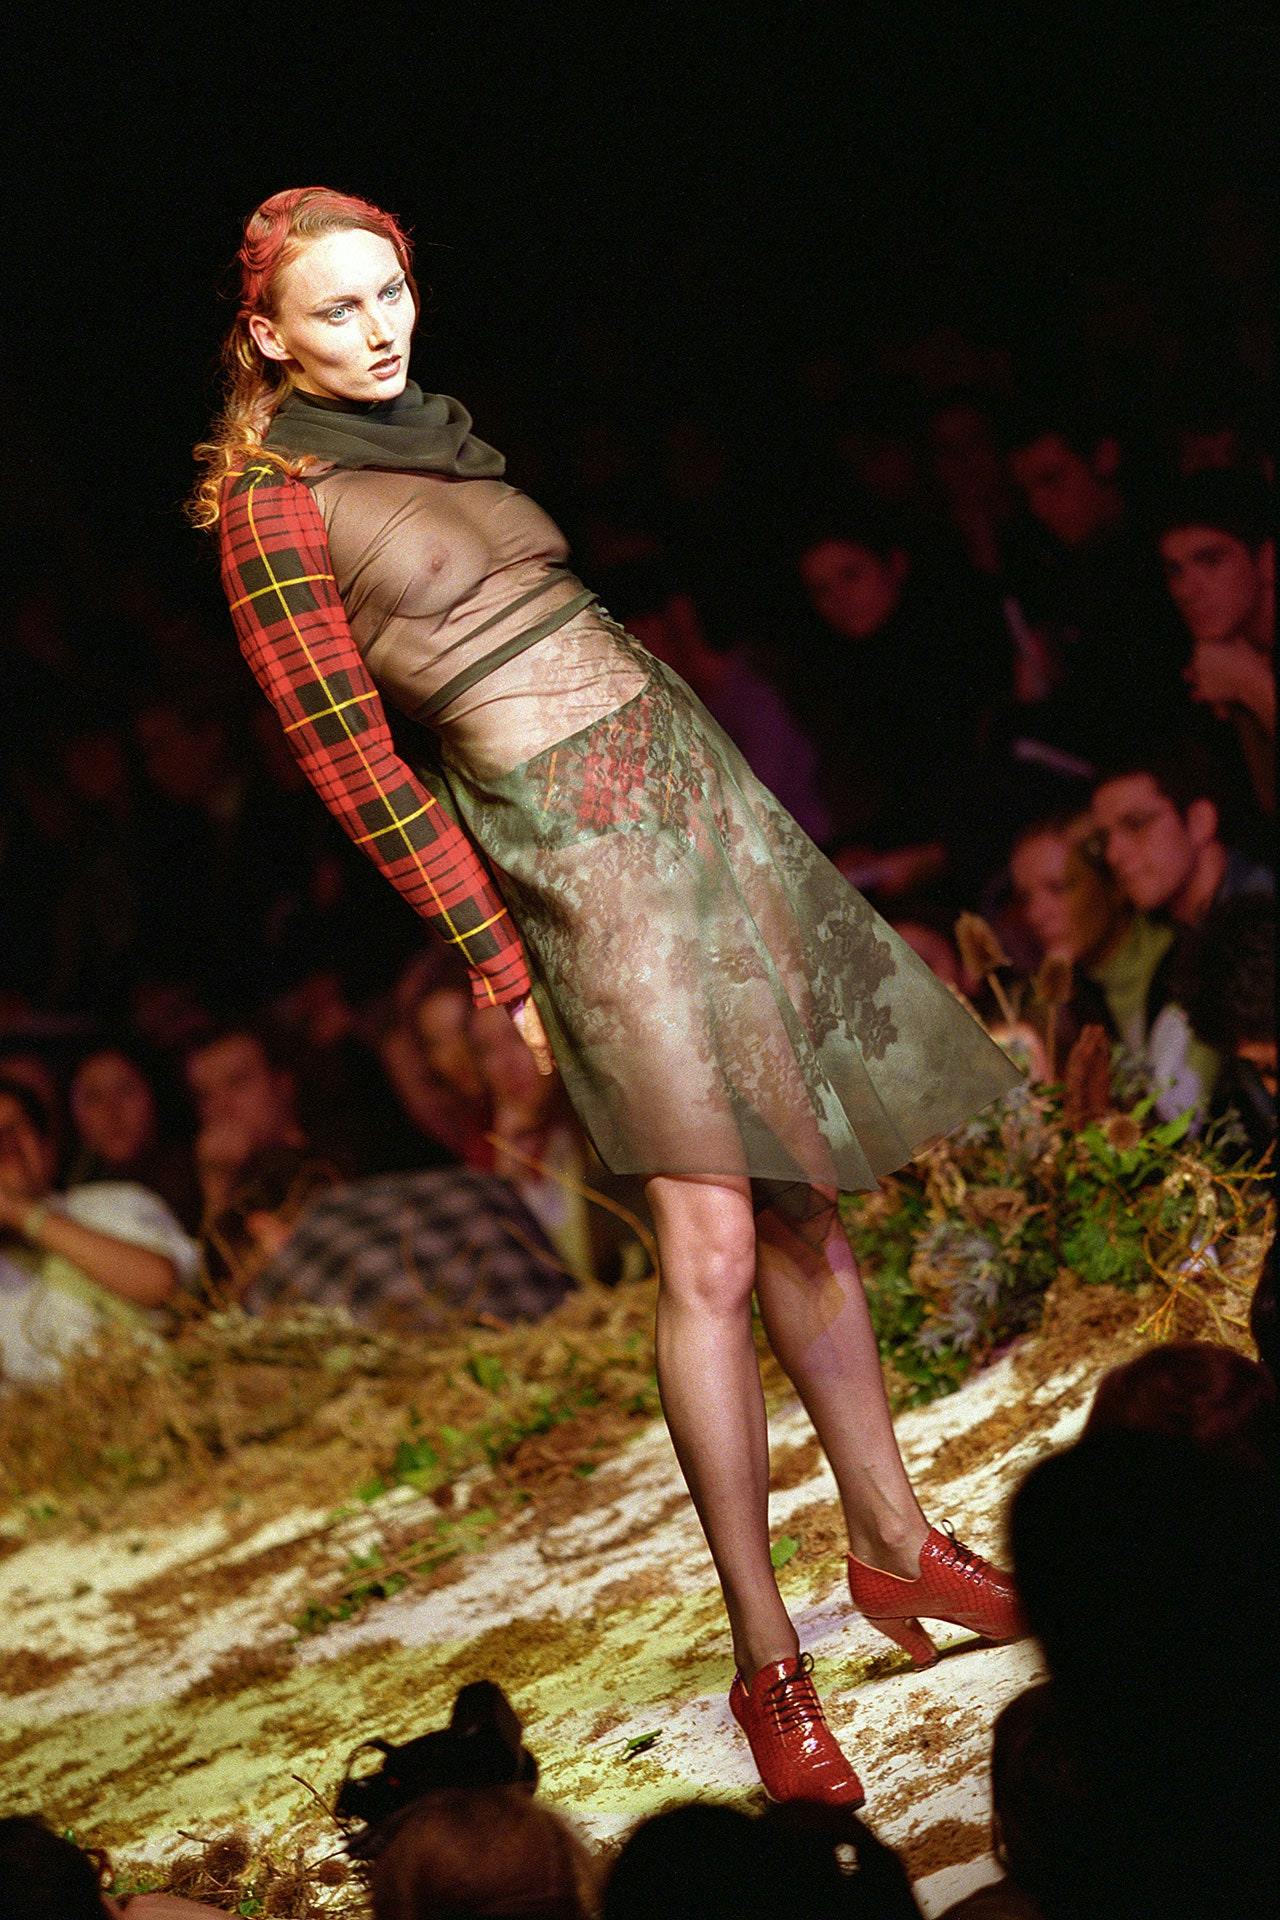 There has been no one like Alexander McQueen on the catwalk since